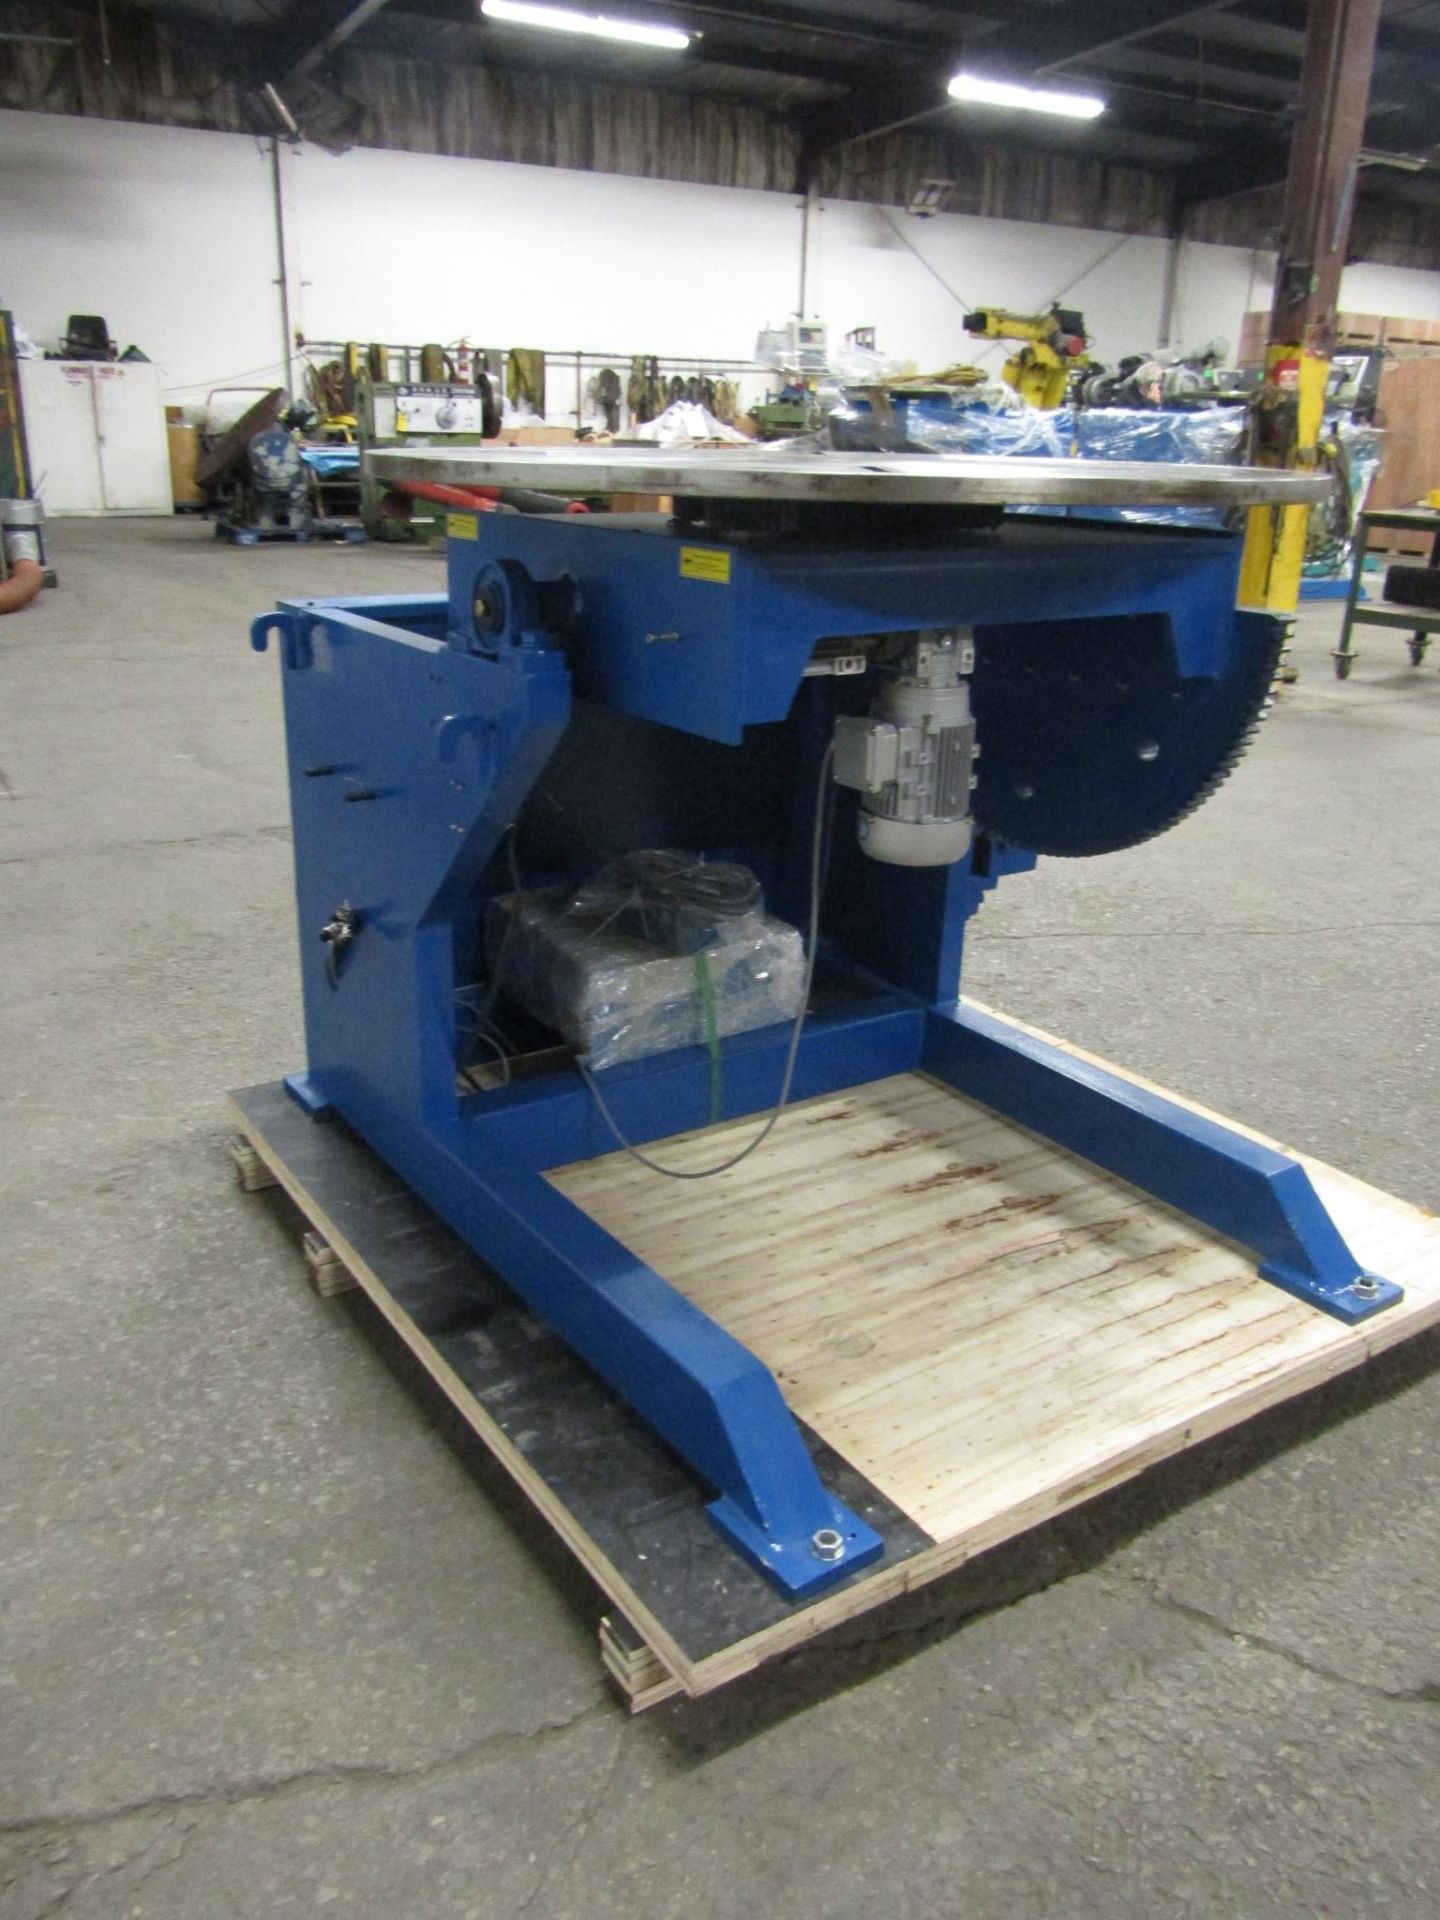 Verner model VD-3000 WELDING POSITIONER 3000lbs capacity - tilt and rotate with variable speed drive - Image 2 of 3